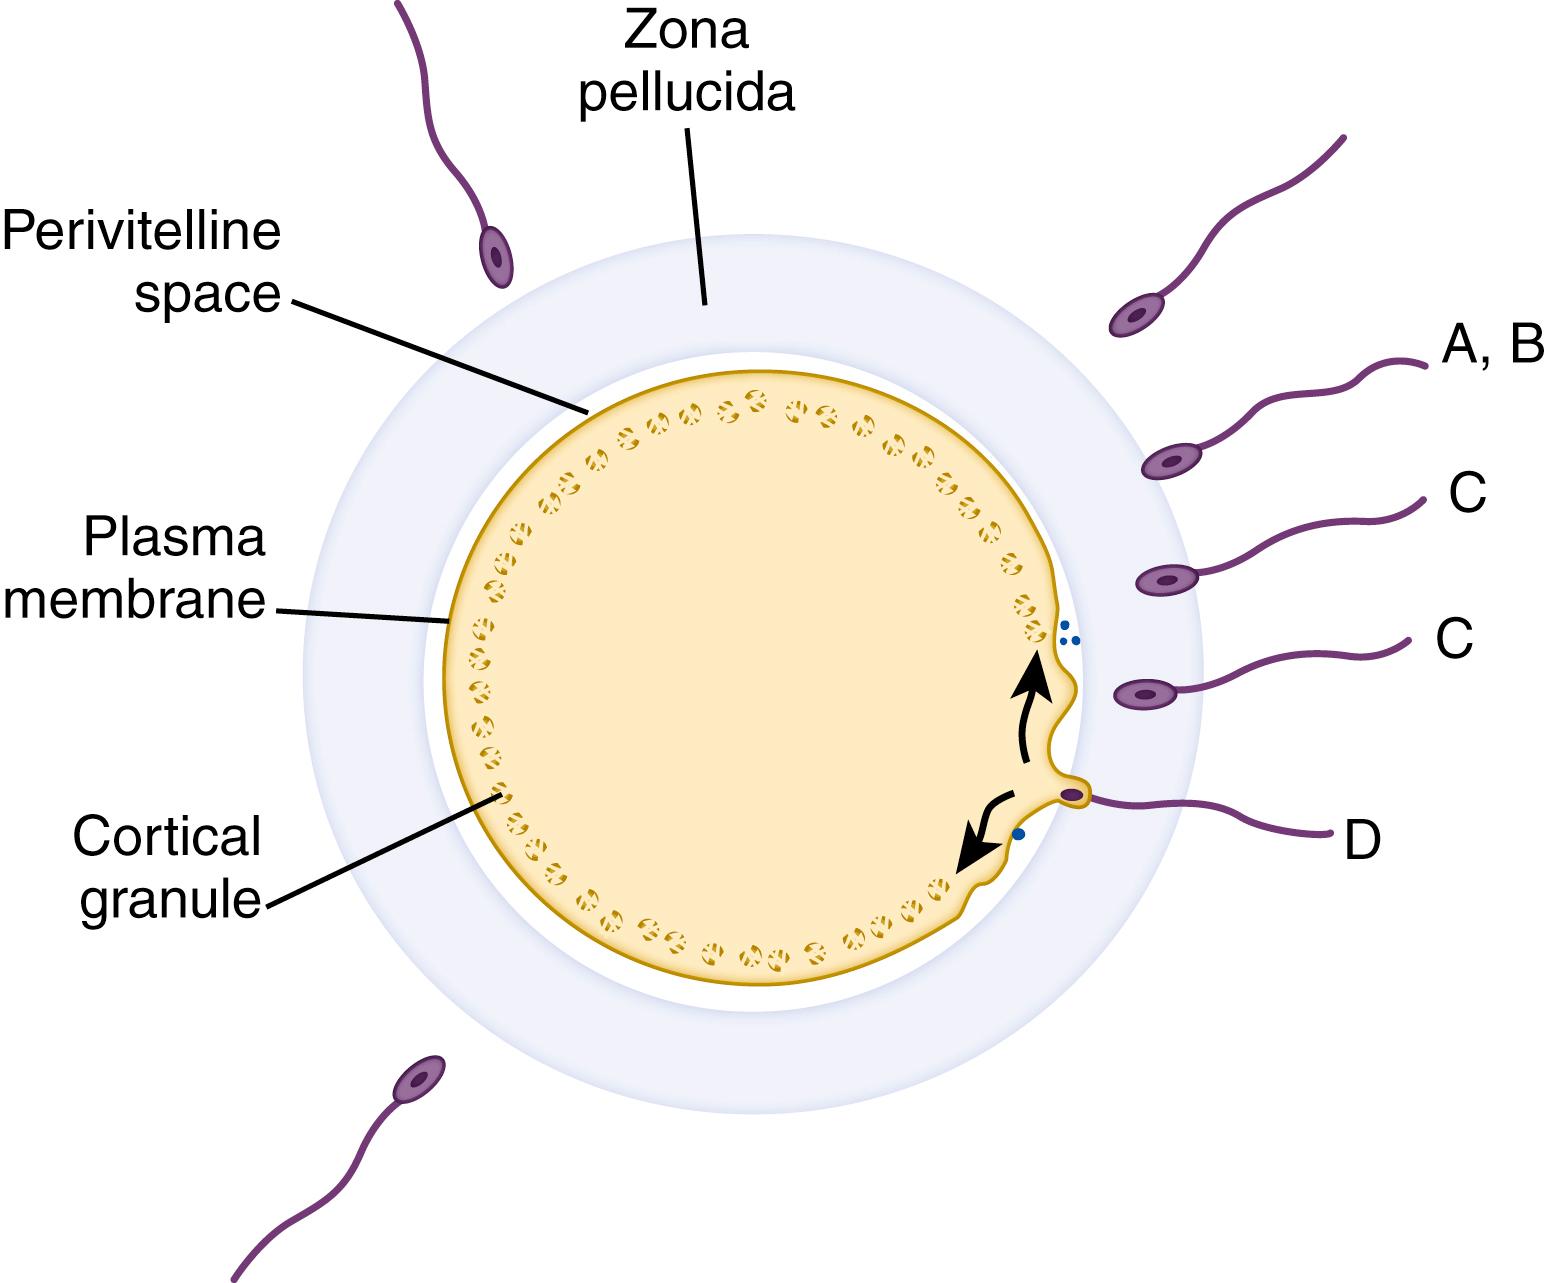 Fig. 3.3, Fertilization pathway. A and B show sperm binding and the acrosome reaction, exposing the zona pellucida to acrosomal enzymes. C depicts penetration of the enzyme-modified zona pellucida by the sperm. D shows activation of the egg, including oocyte membrane hyperpolarization and release of enzymes by the cortical granules.